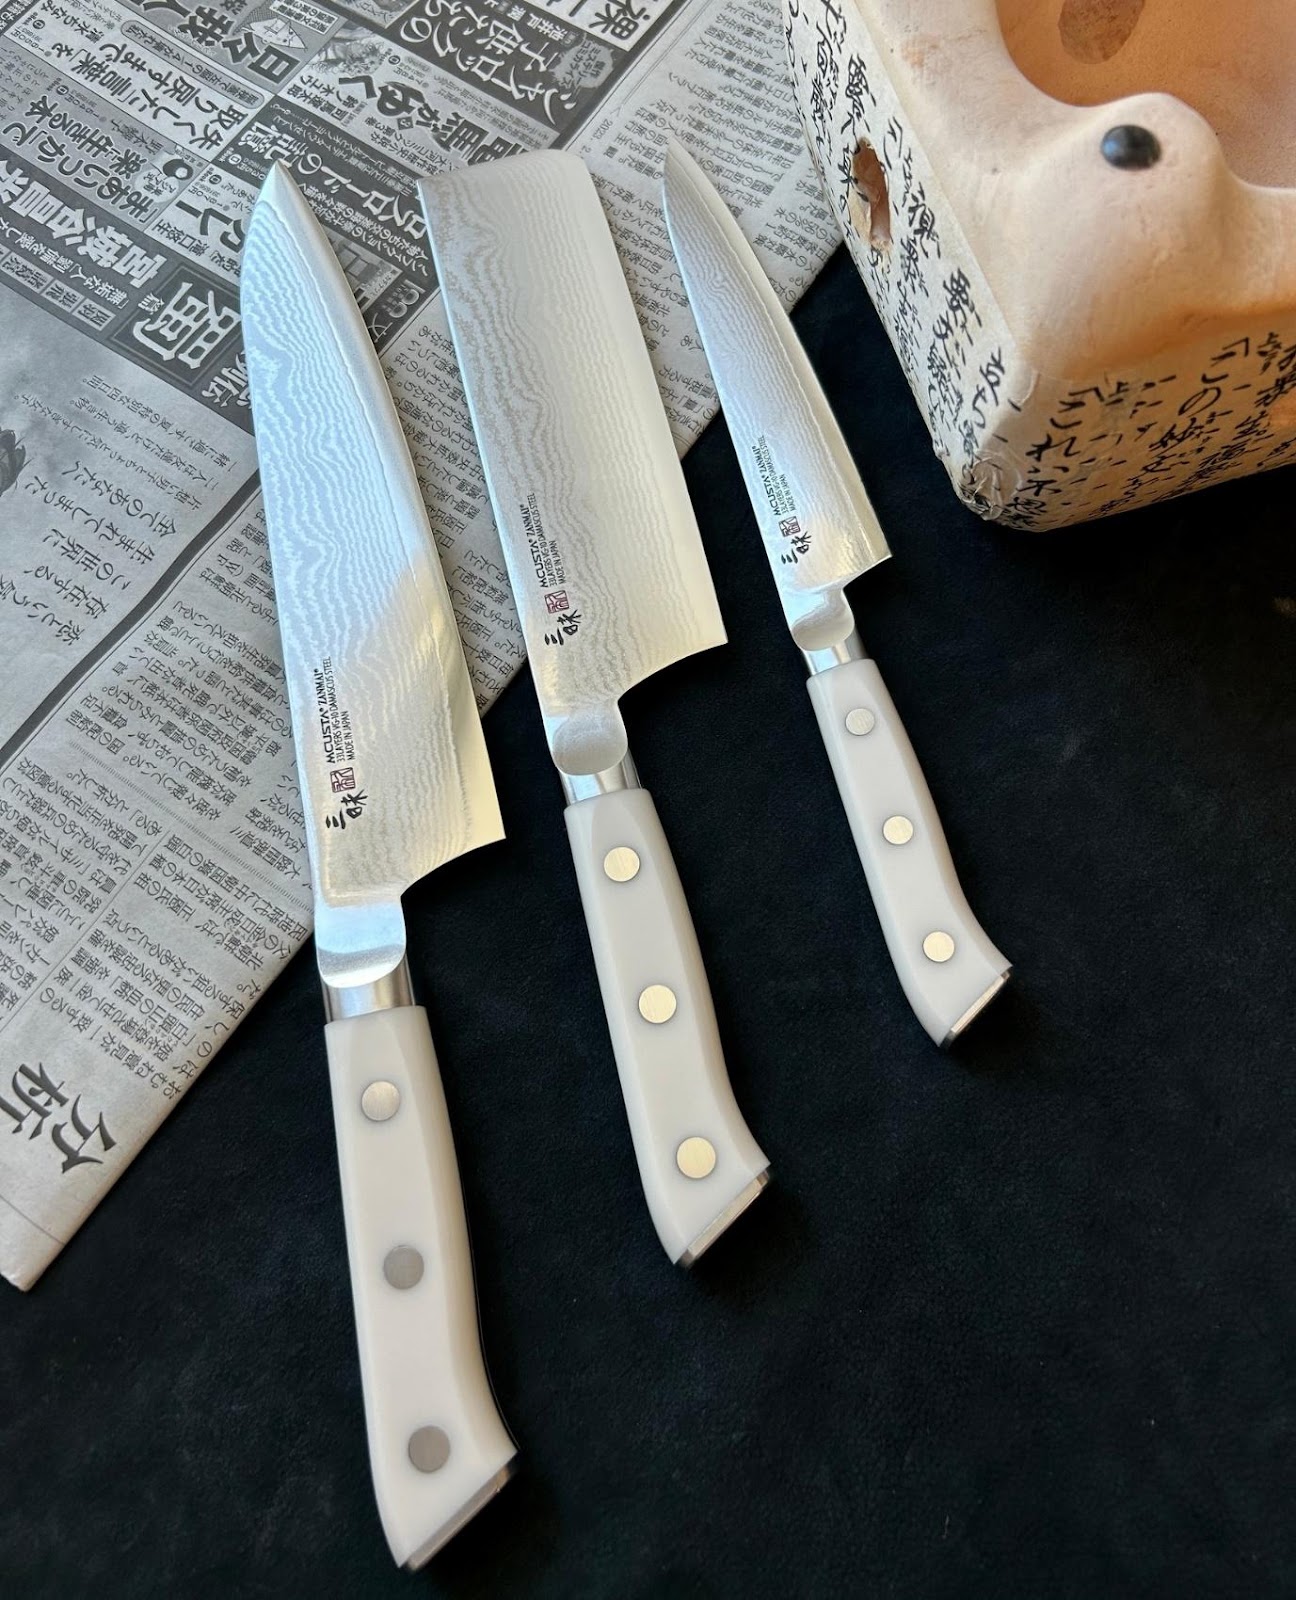 A group of knives on a newspaper

Description automatically generated